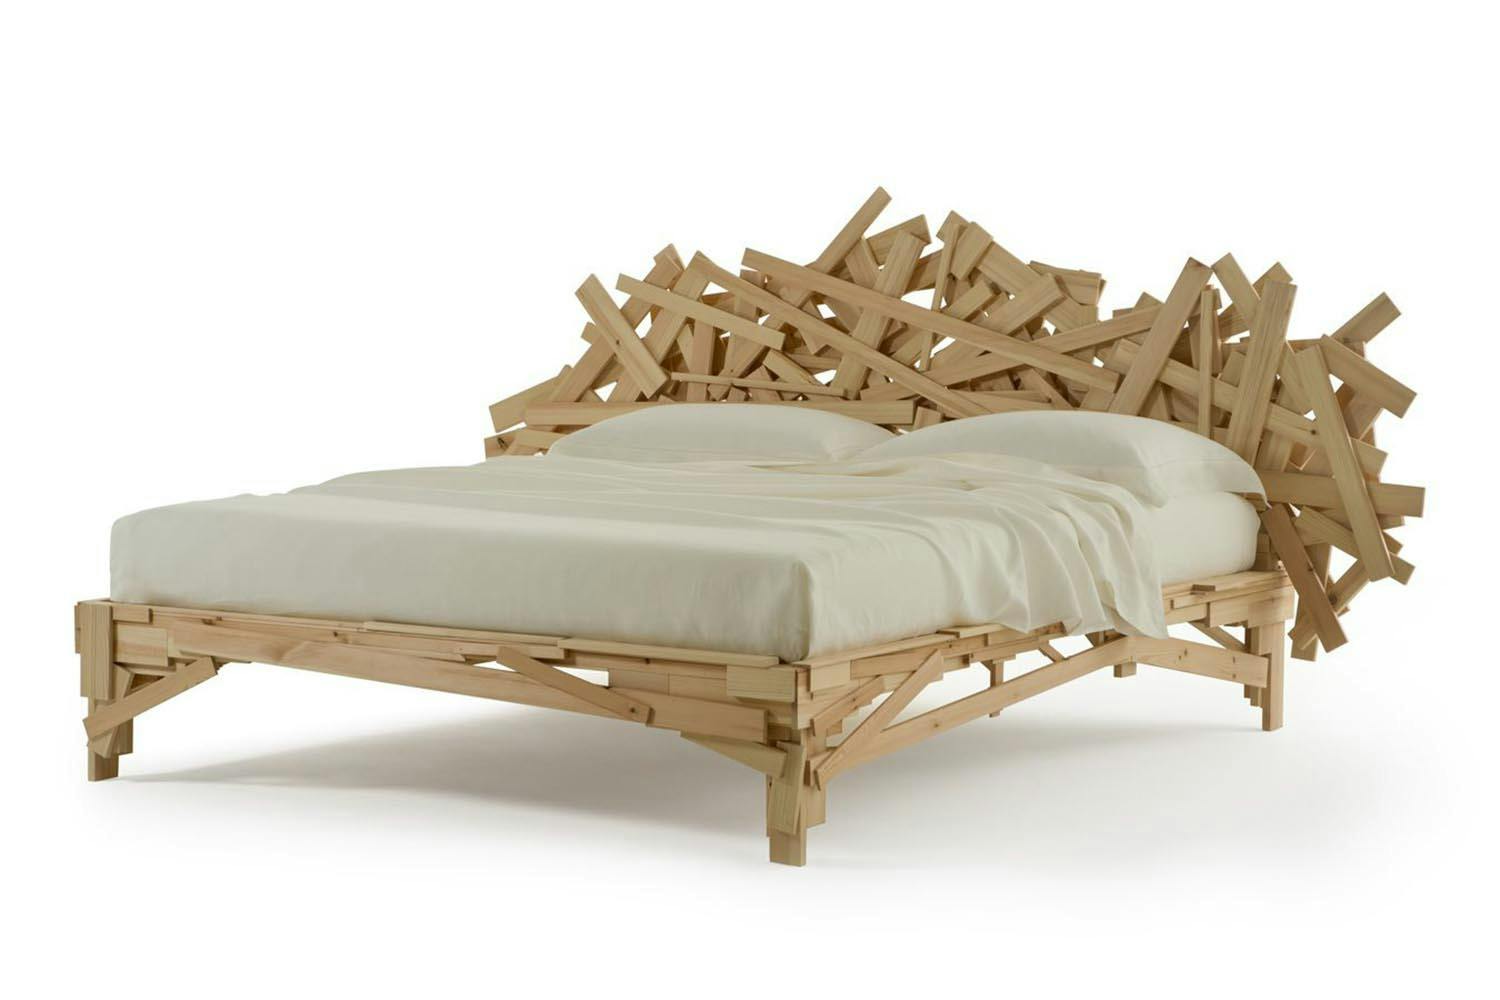 Favela Bed by F. e H. Campana for Edra | Space Furniture